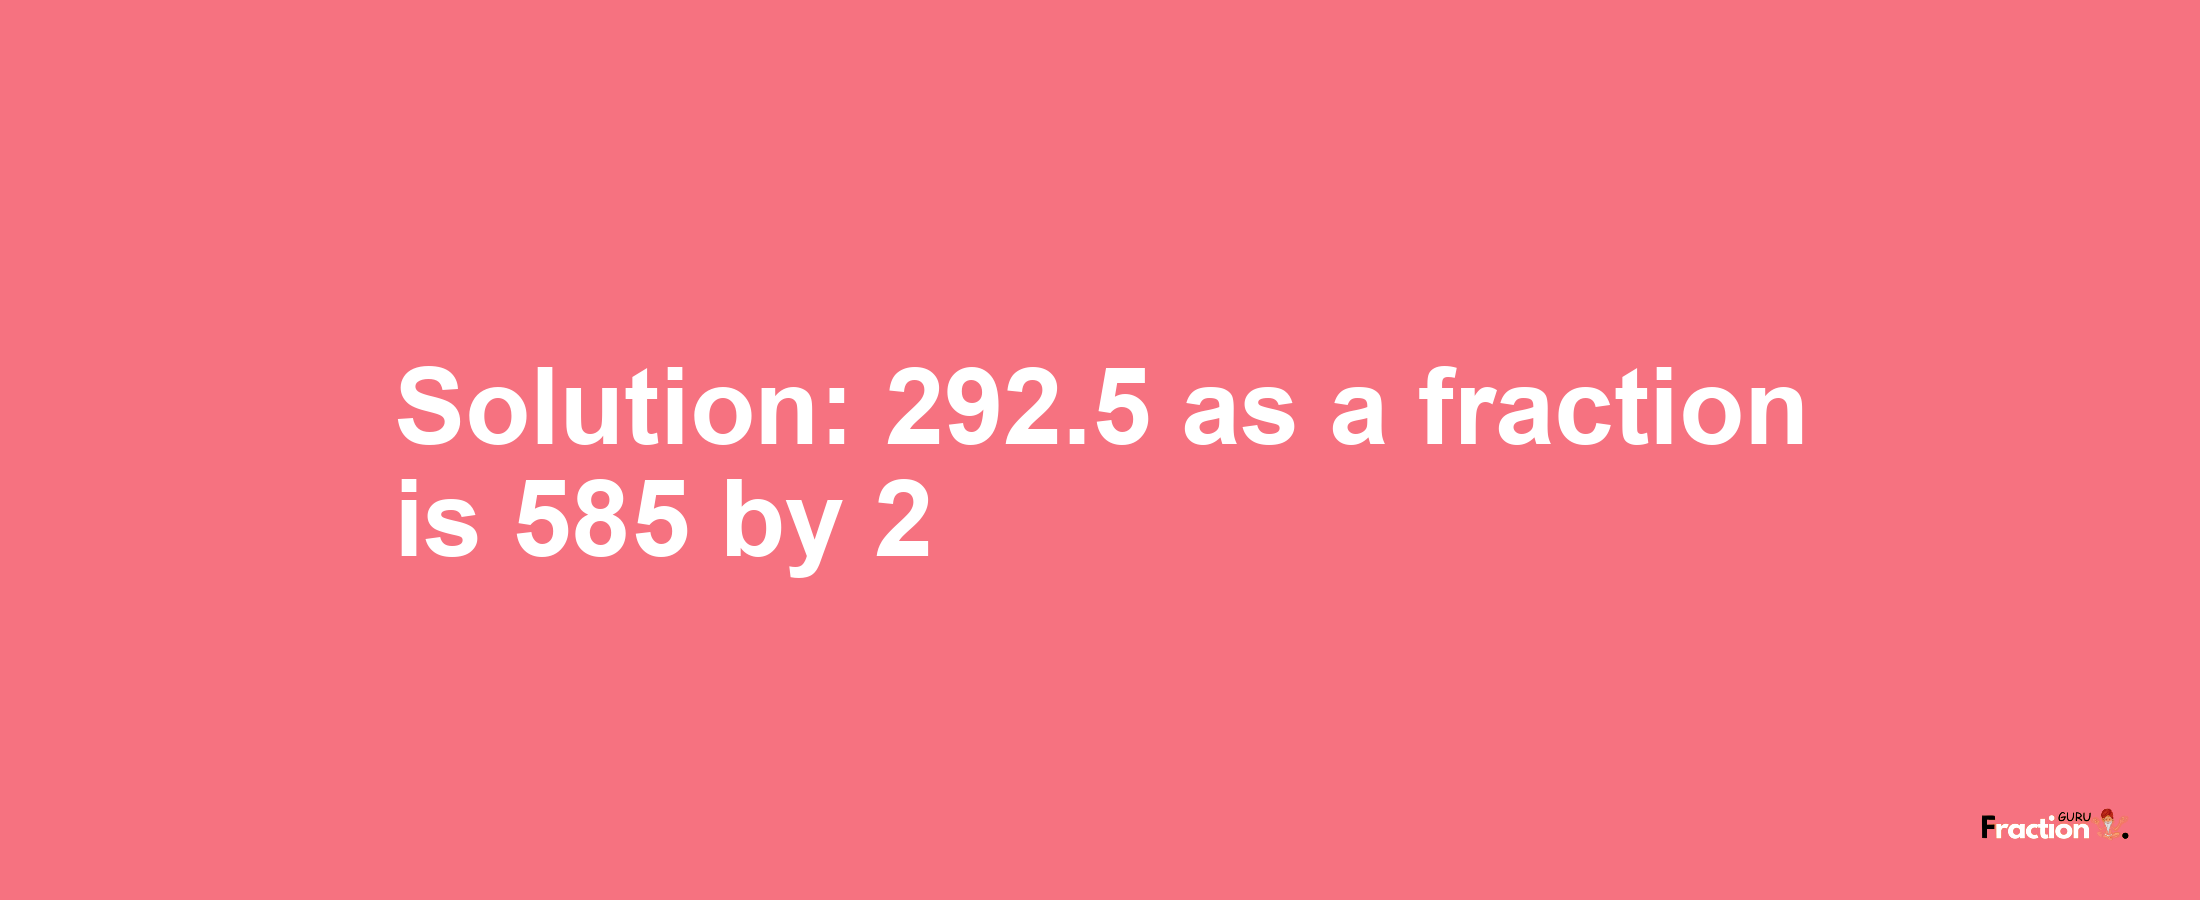 Solution:292.5 as a fraction is 585/2